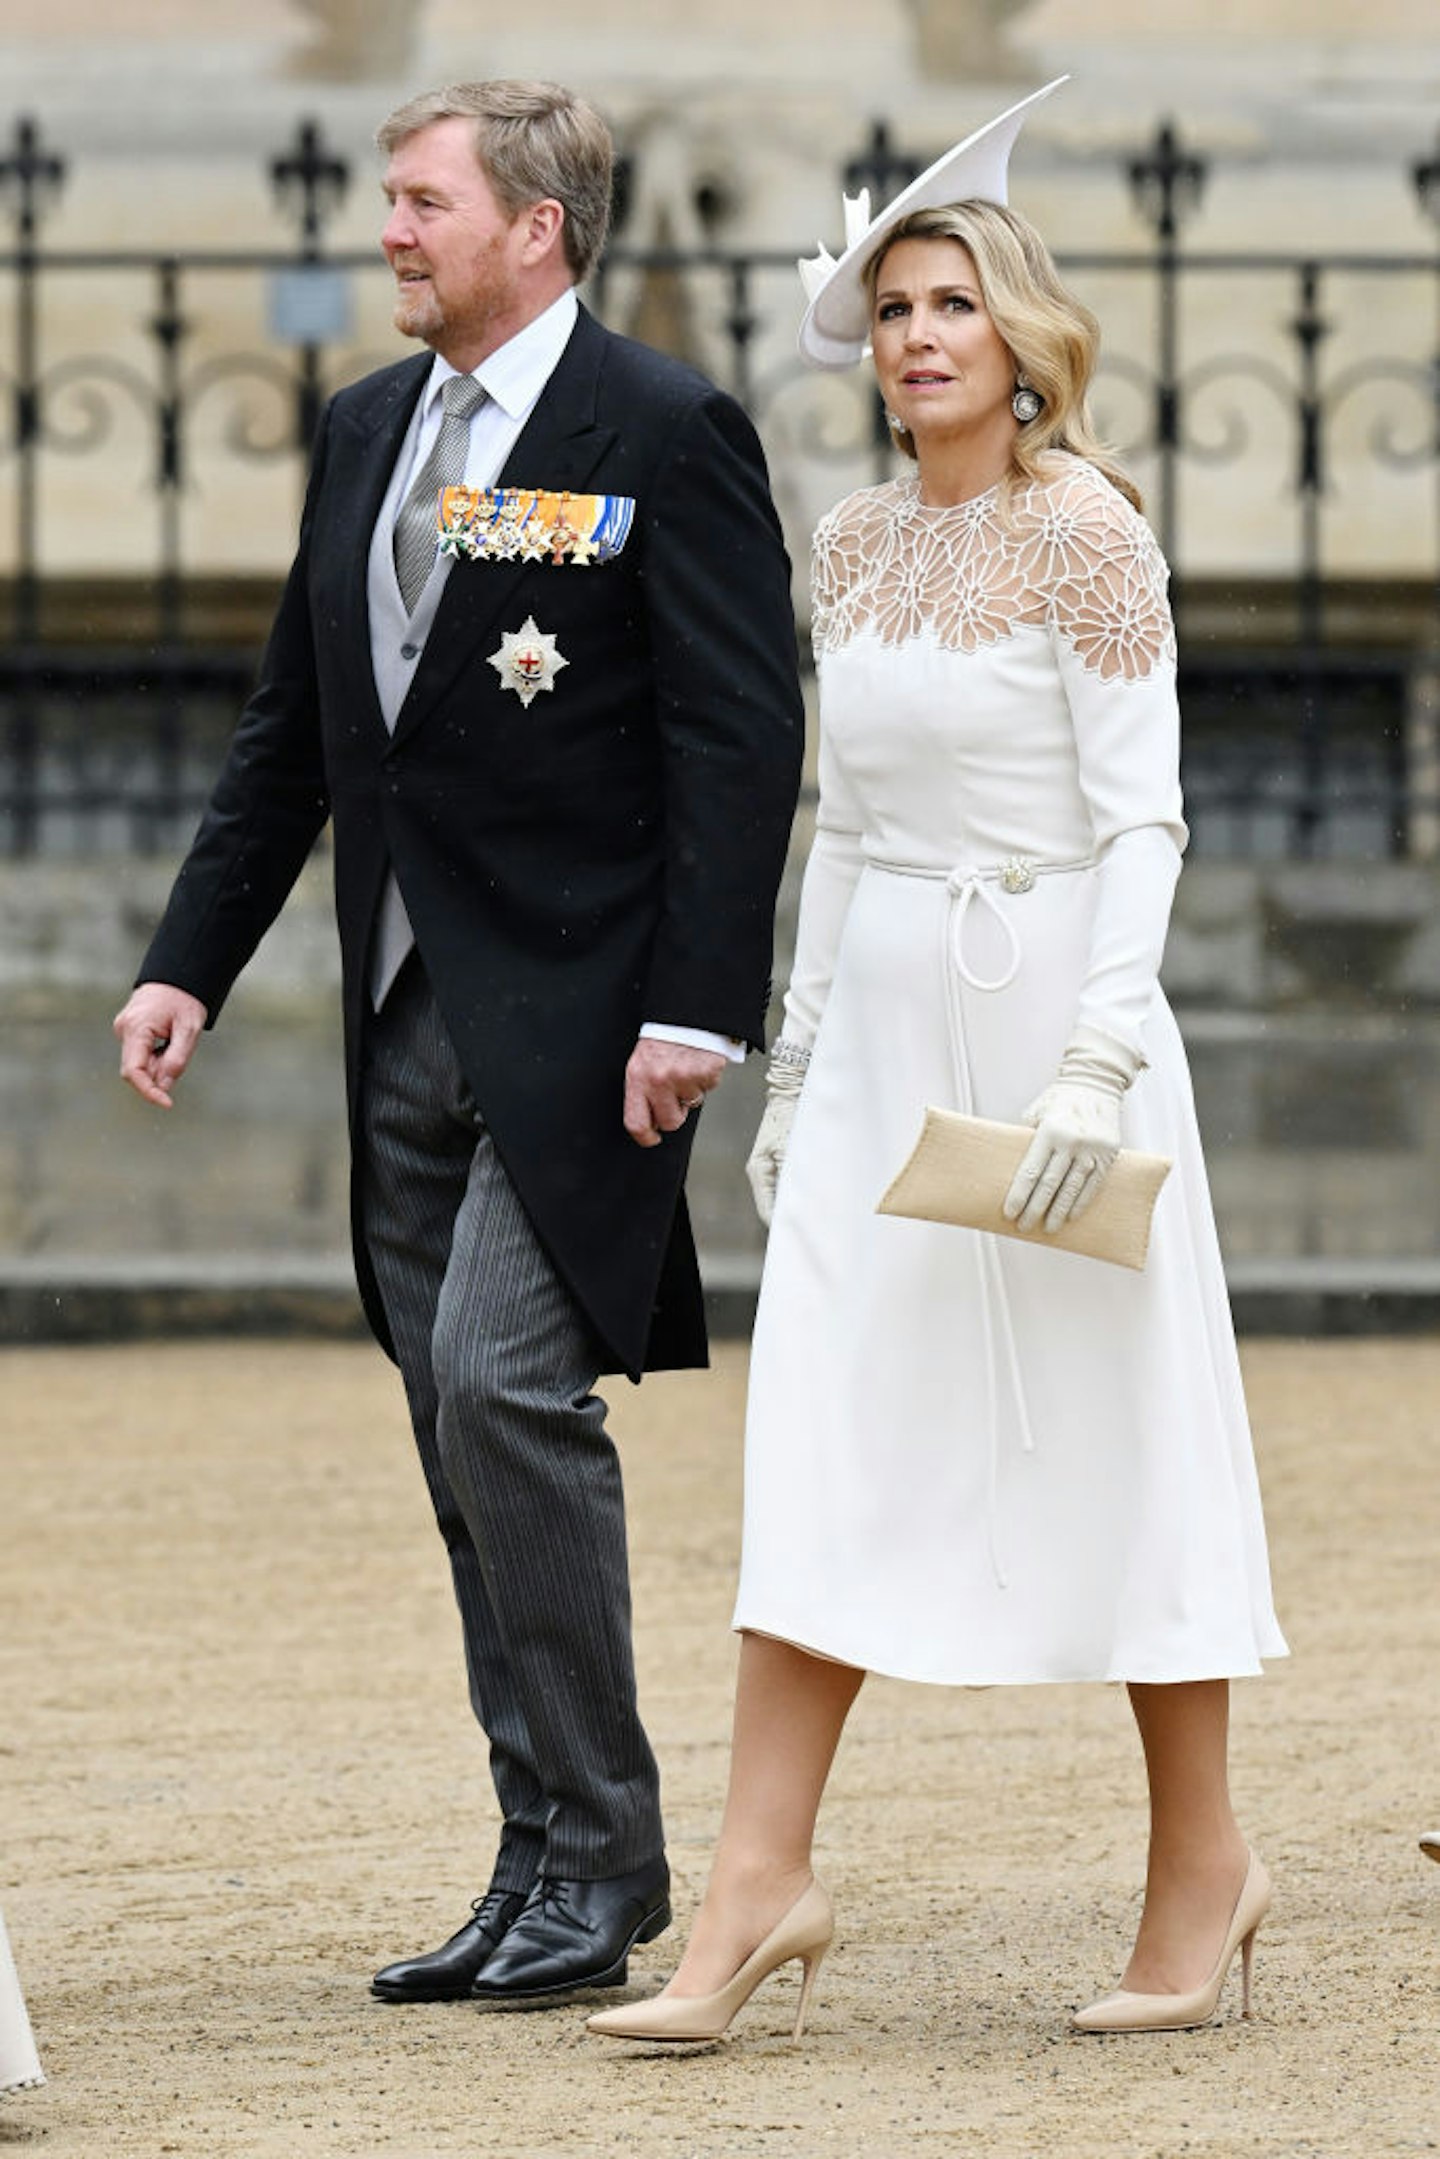 Willem-Alexander of the Netherlands and Queen Máxima of the Netherlands attend the Coronation